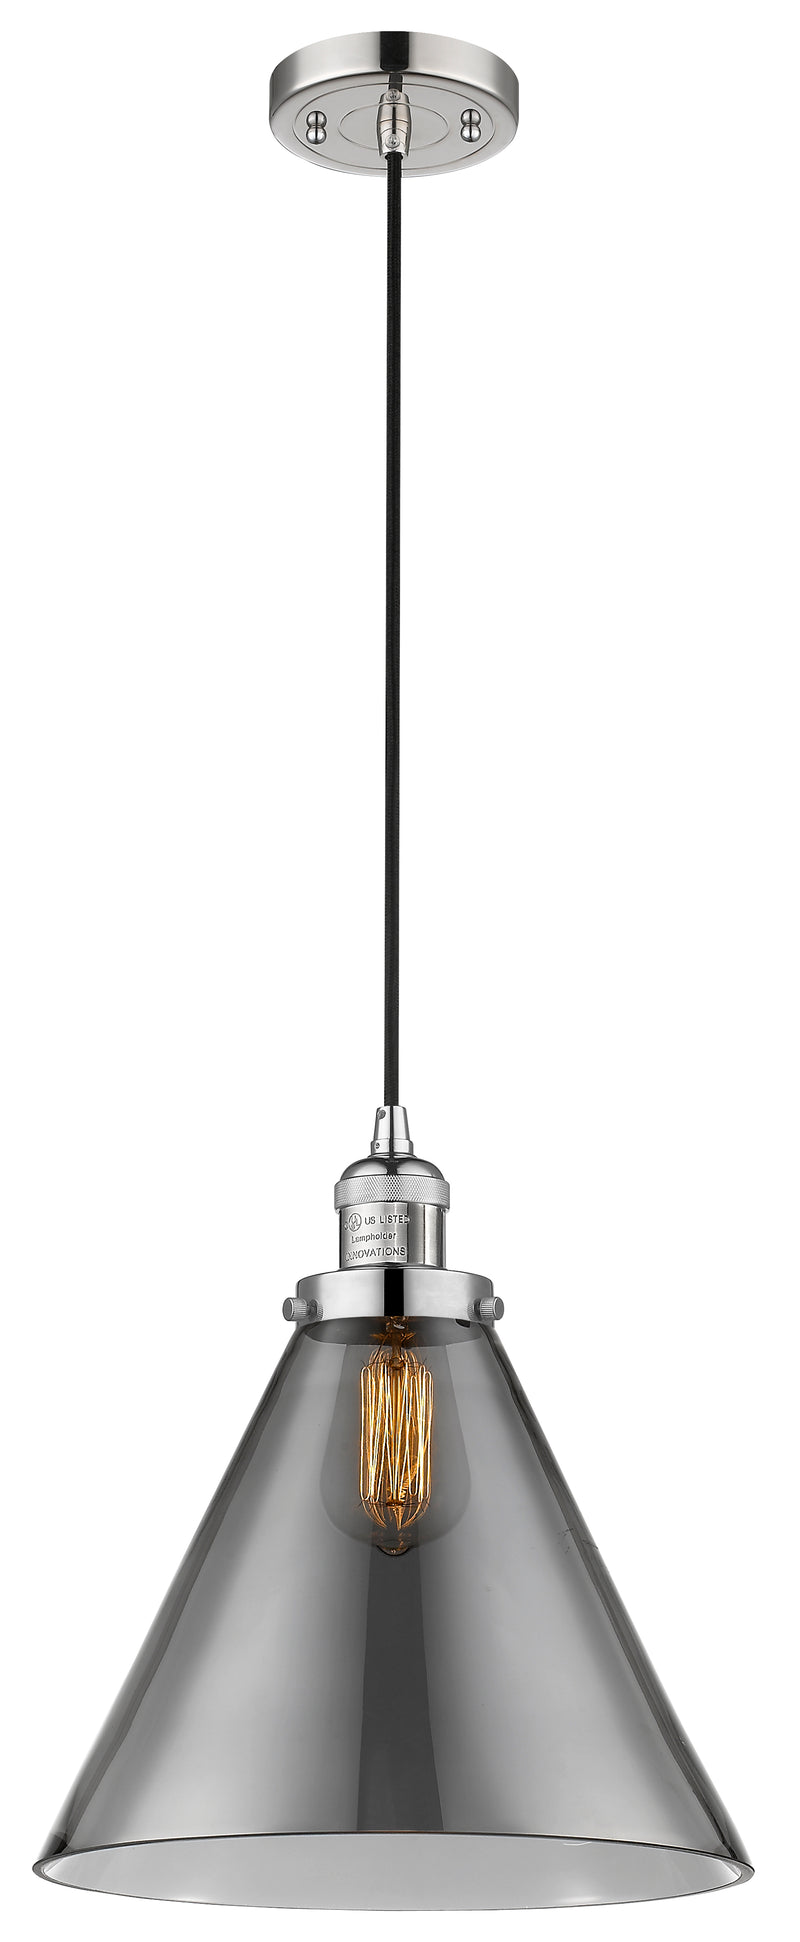 Innovations Lighting X-Large Cone 1-100 watt 12 inch Polished Nickel Mini Pendant with Smoked glass 201CPNG43L